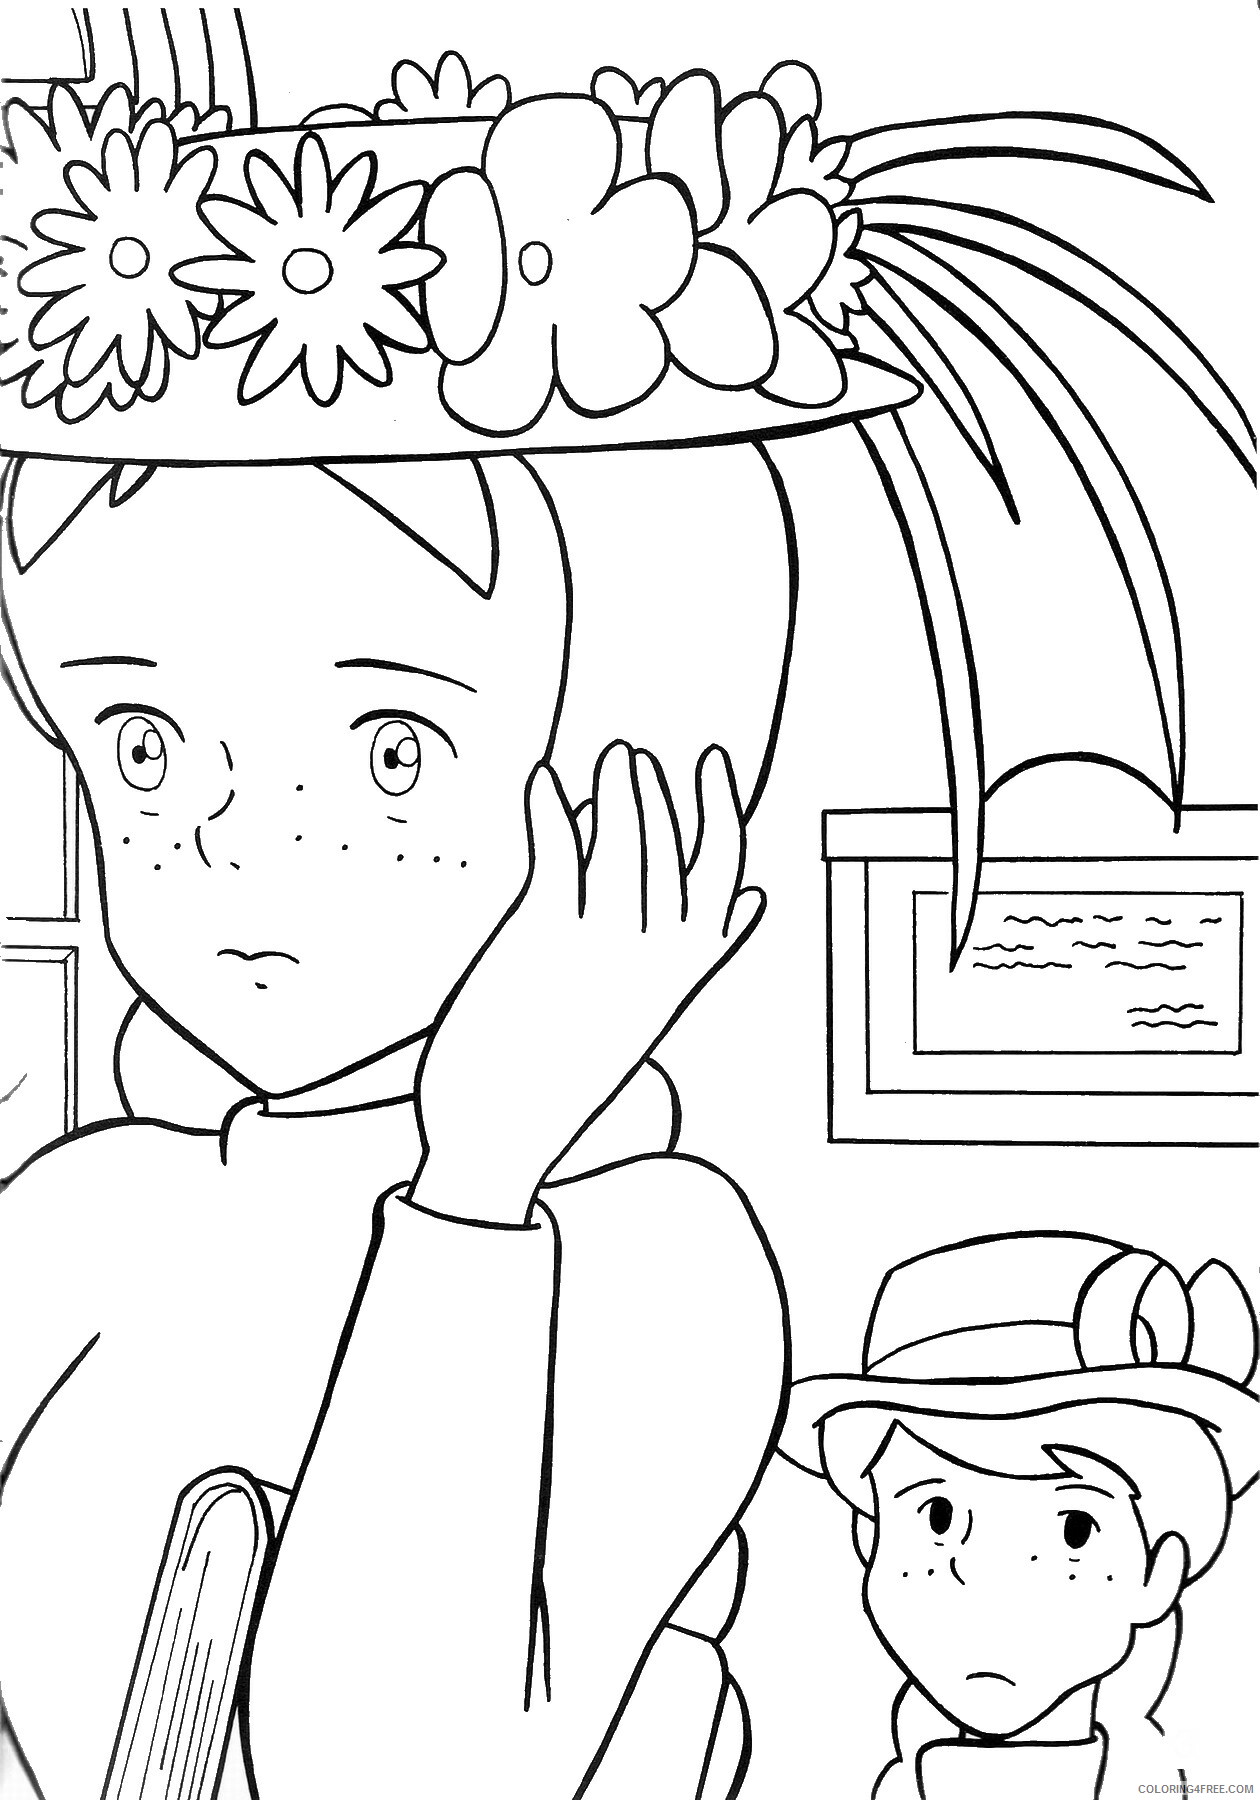 Anne of Green Gables Coloring Pages TV Film anne green gables 4 Printable 2020 00160 Coloring4free